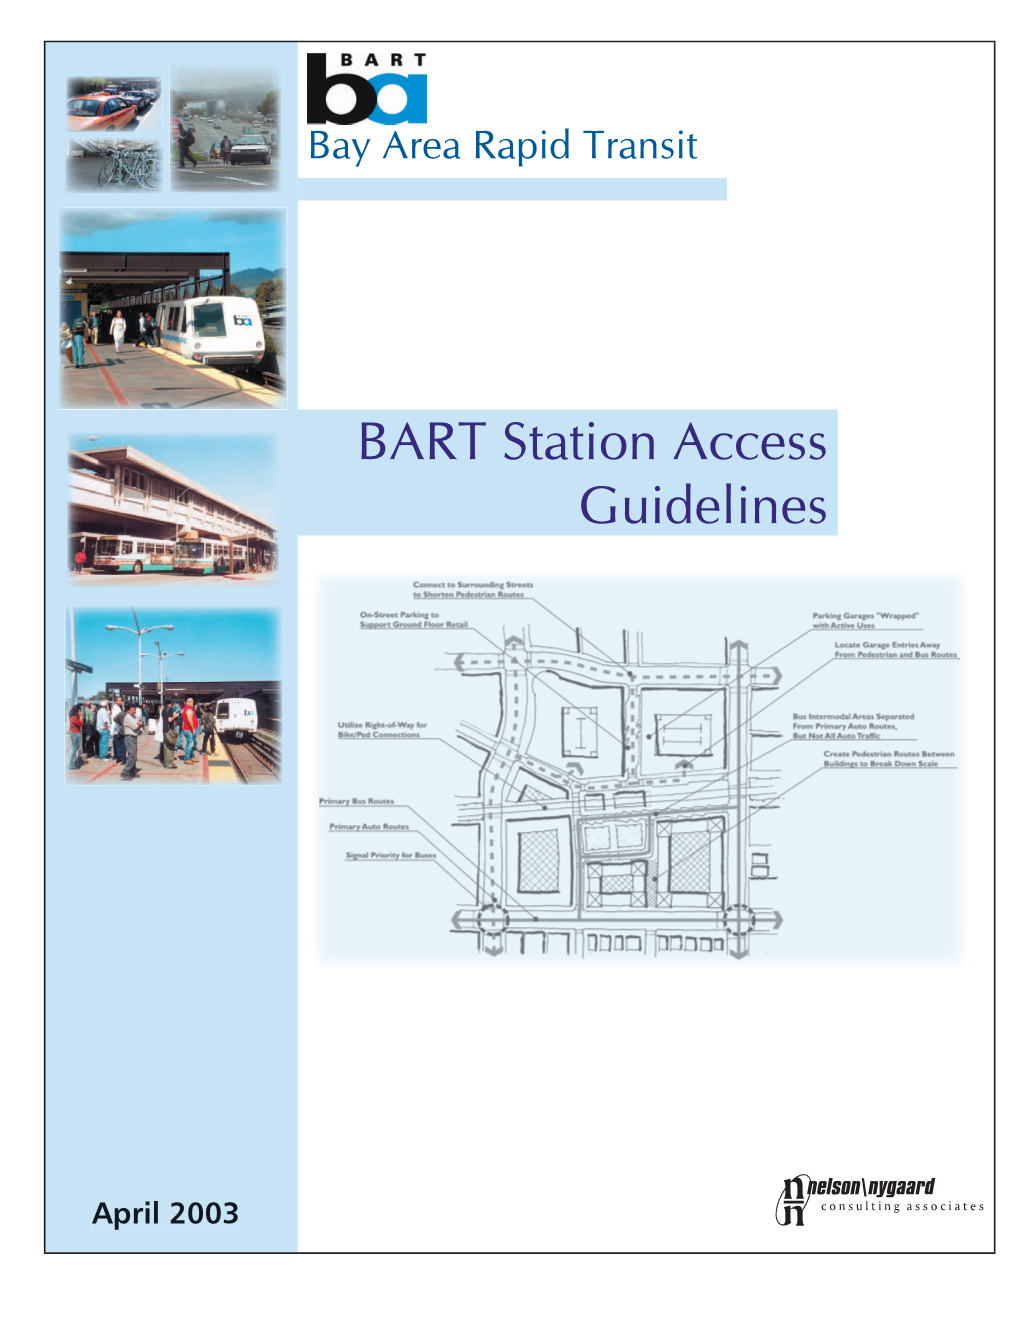 BART Station Access Guidelines